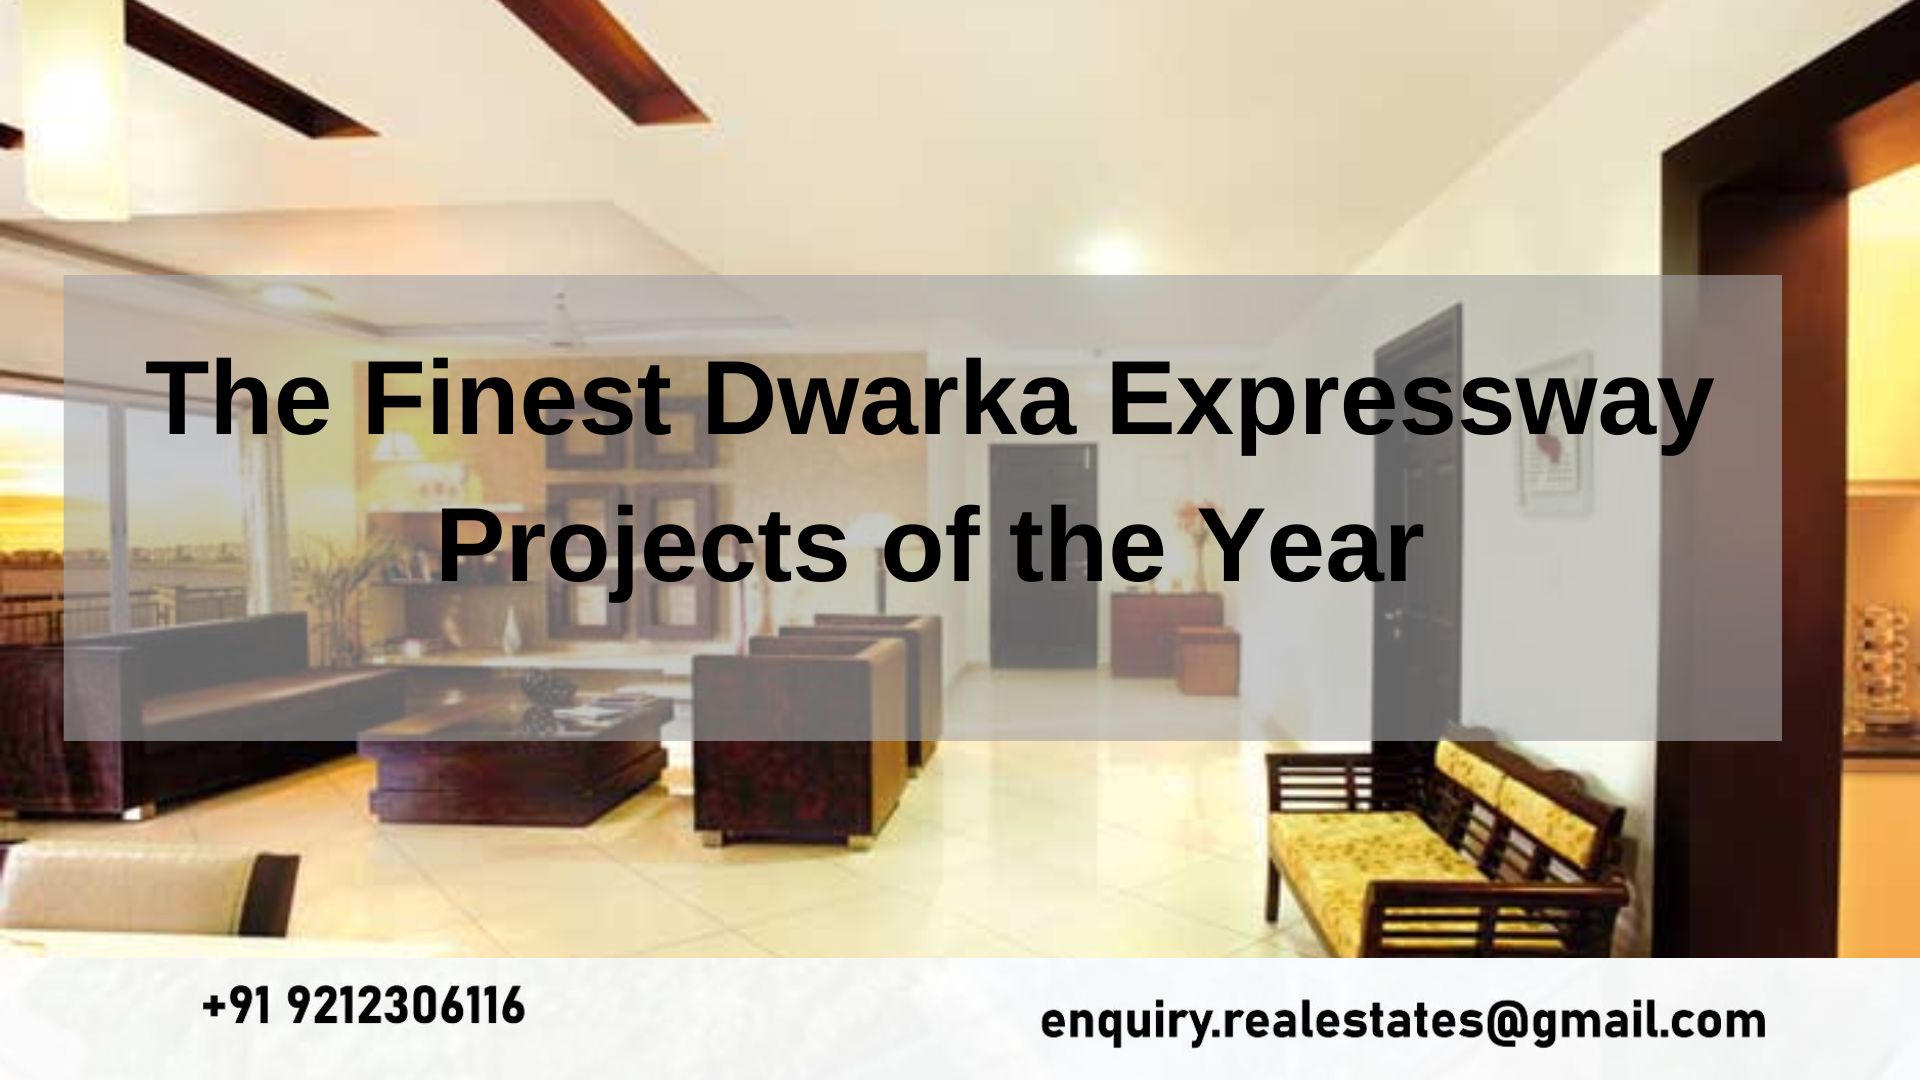 The Finest Dwarka Expressway Projects of the Year